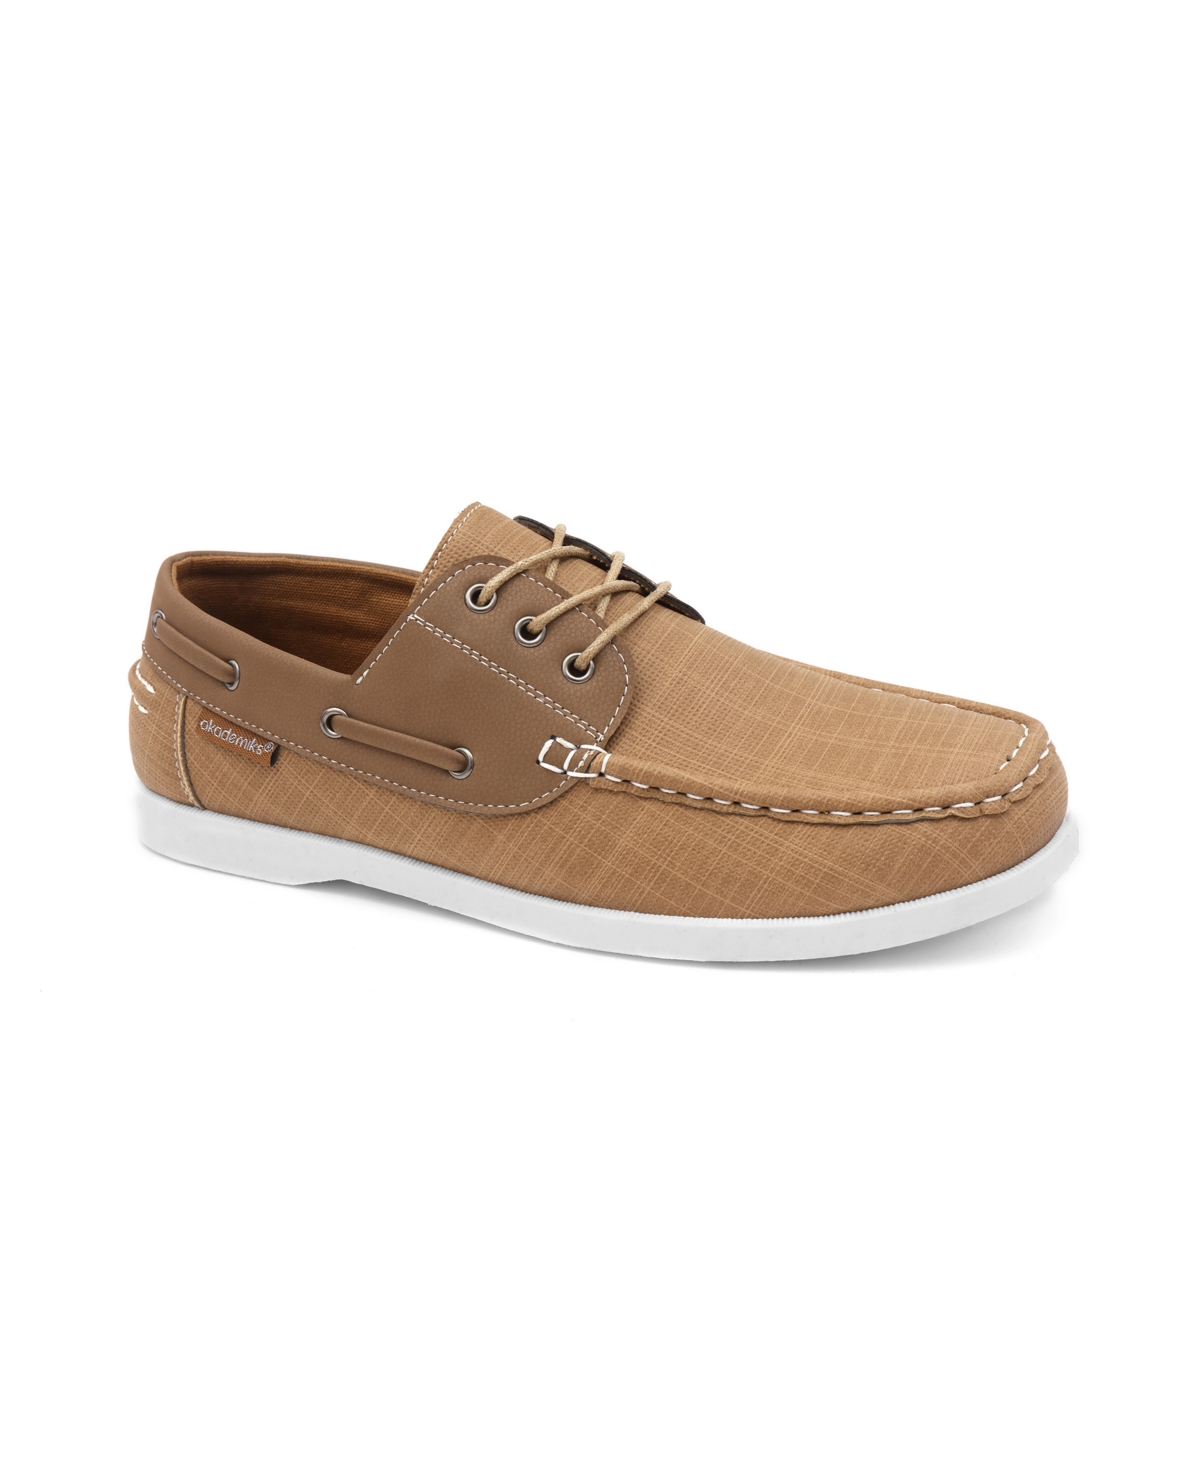 Akademiks Men's Marina 2.0 Lace-up Boat Shoes Men's Shoes In Tan